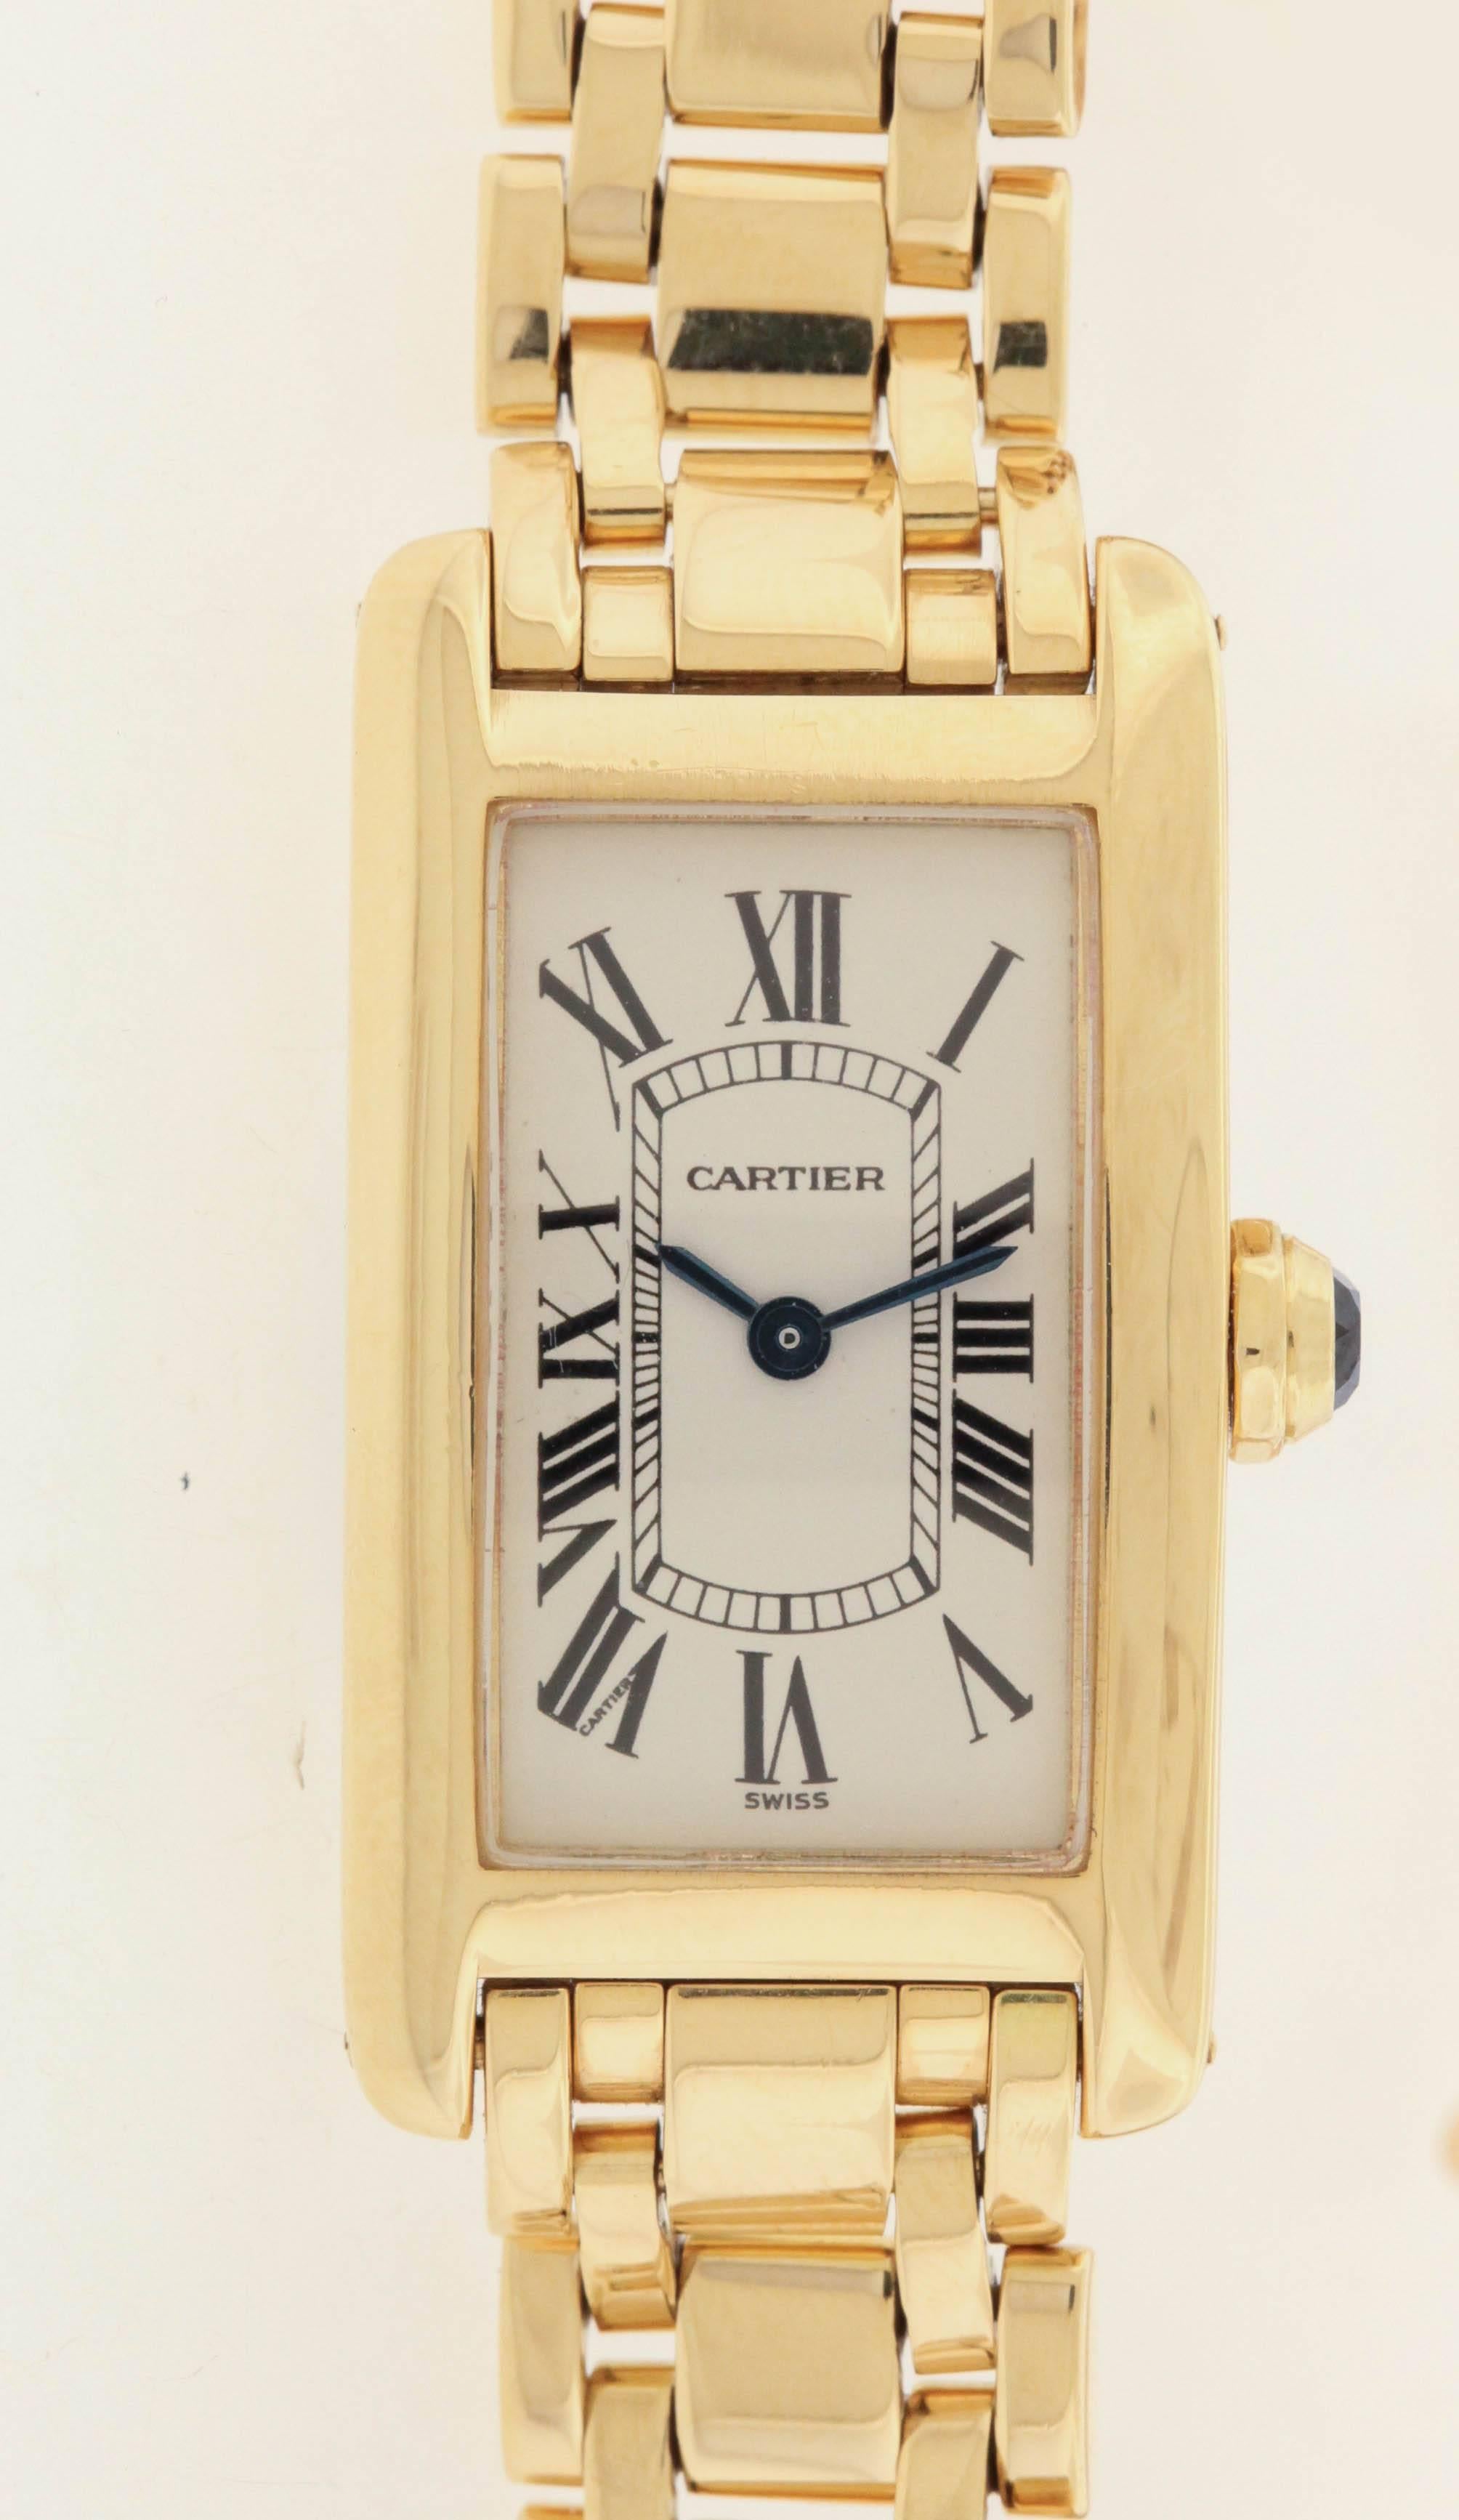 18K yellow gold Cartier Tank Americaine, Ref. 1710, made in the 1990's, is a  curved-rectangular, water-resistant, 18K yellow gold women's quartz wristwatch on an 18K yellow gold Cartier link bracelet with concealed double-folding clasp.  The 19mm x